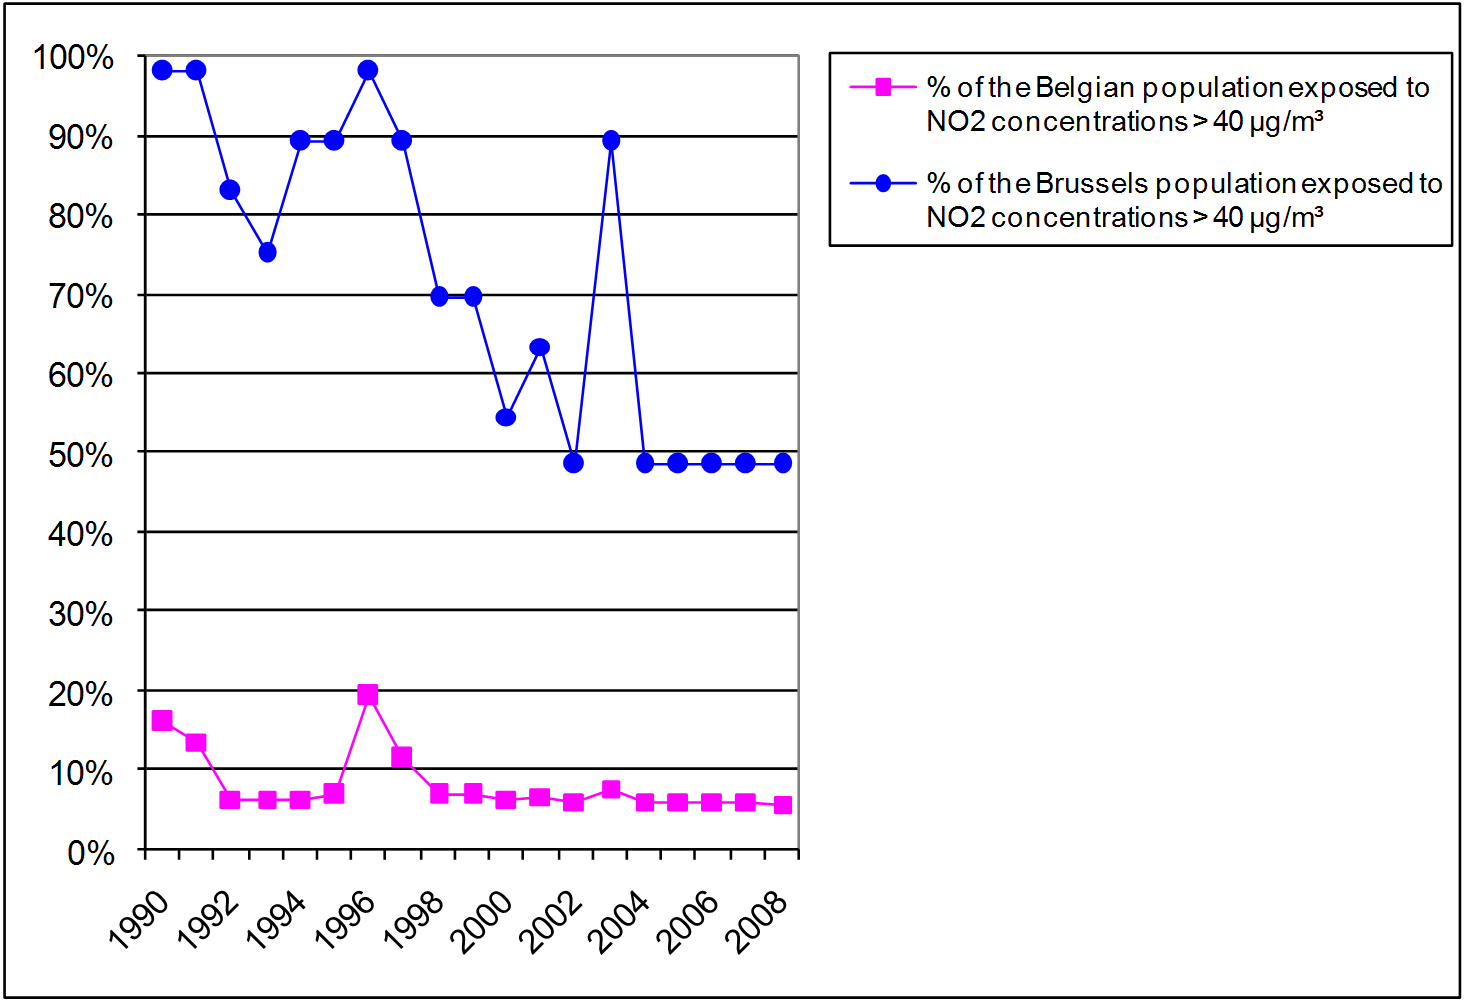 Figure 3: Percentage of the Belgian and the Brussels population potentially exposed to NO2